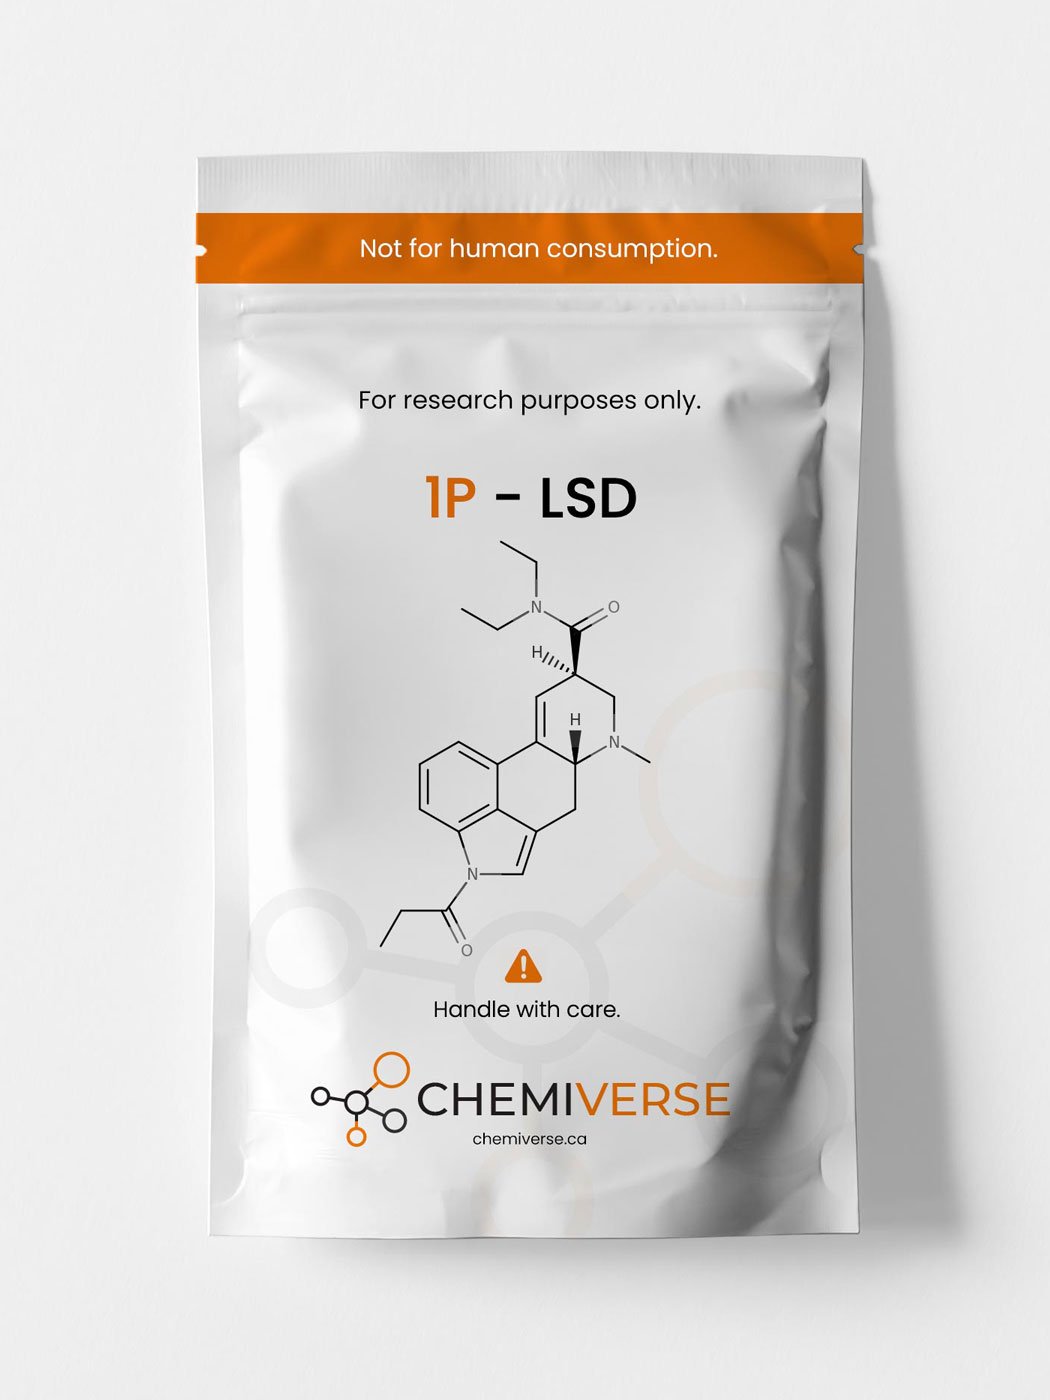 1P-LSD for Sale: Everything You Need to Know